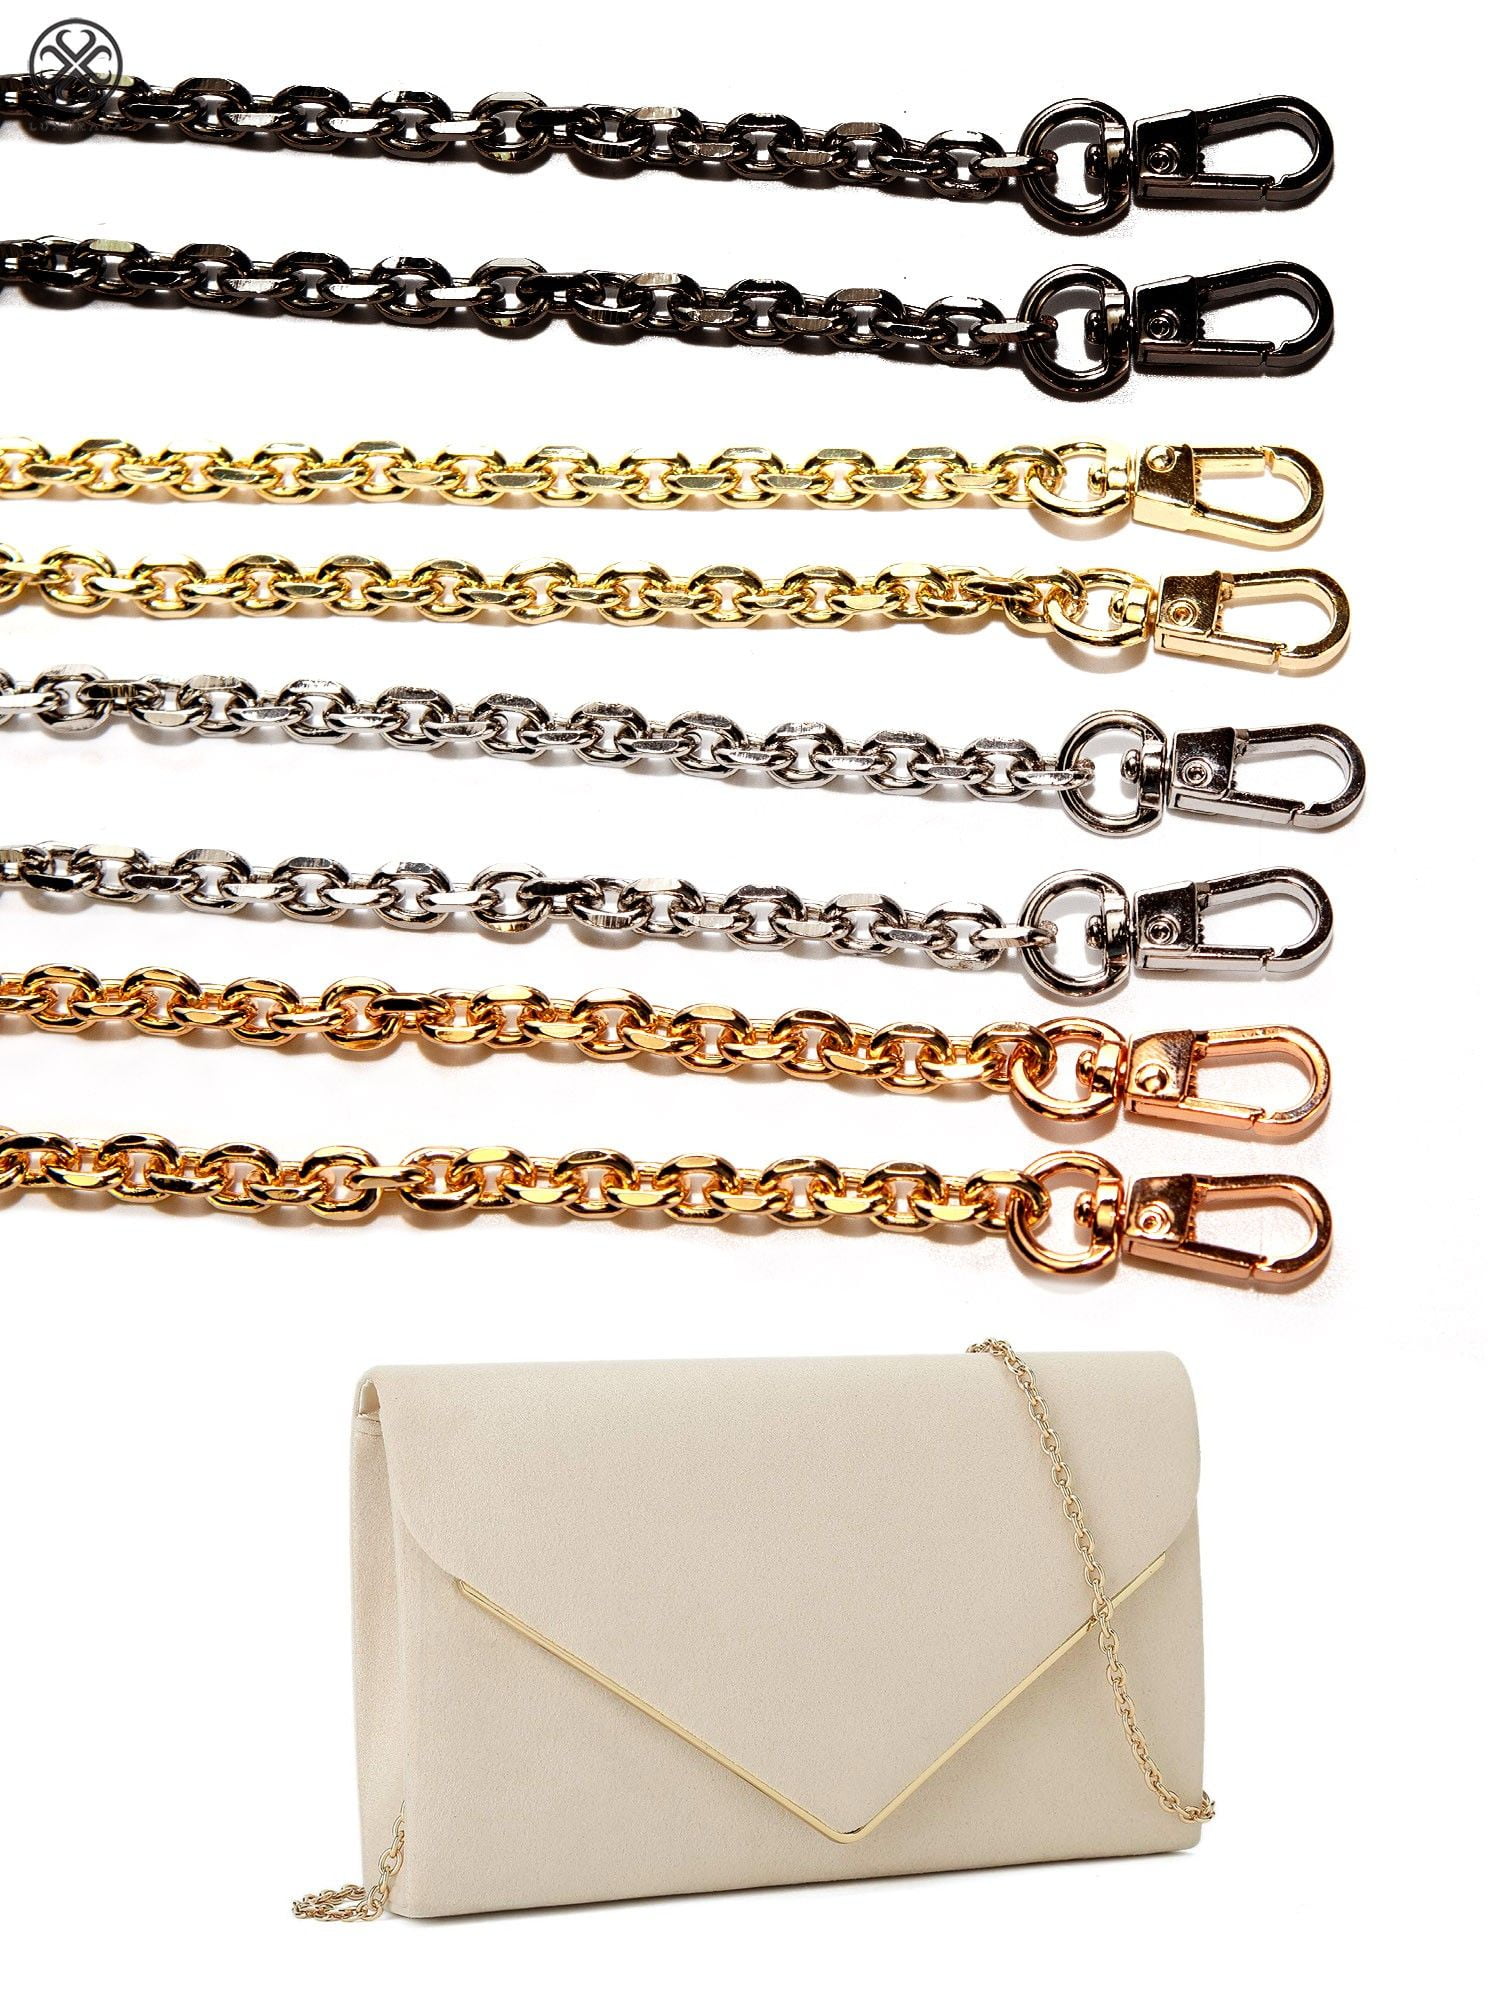 Metal Purse Chain Strap 16.9inch Short Metal Handbag Chain Shoulder Chain  Strap Gold Replacement Shoulder Bag Handle Chain with Swivel Clasp for DIY  Tote Clutch Satchel Wallet Charms 